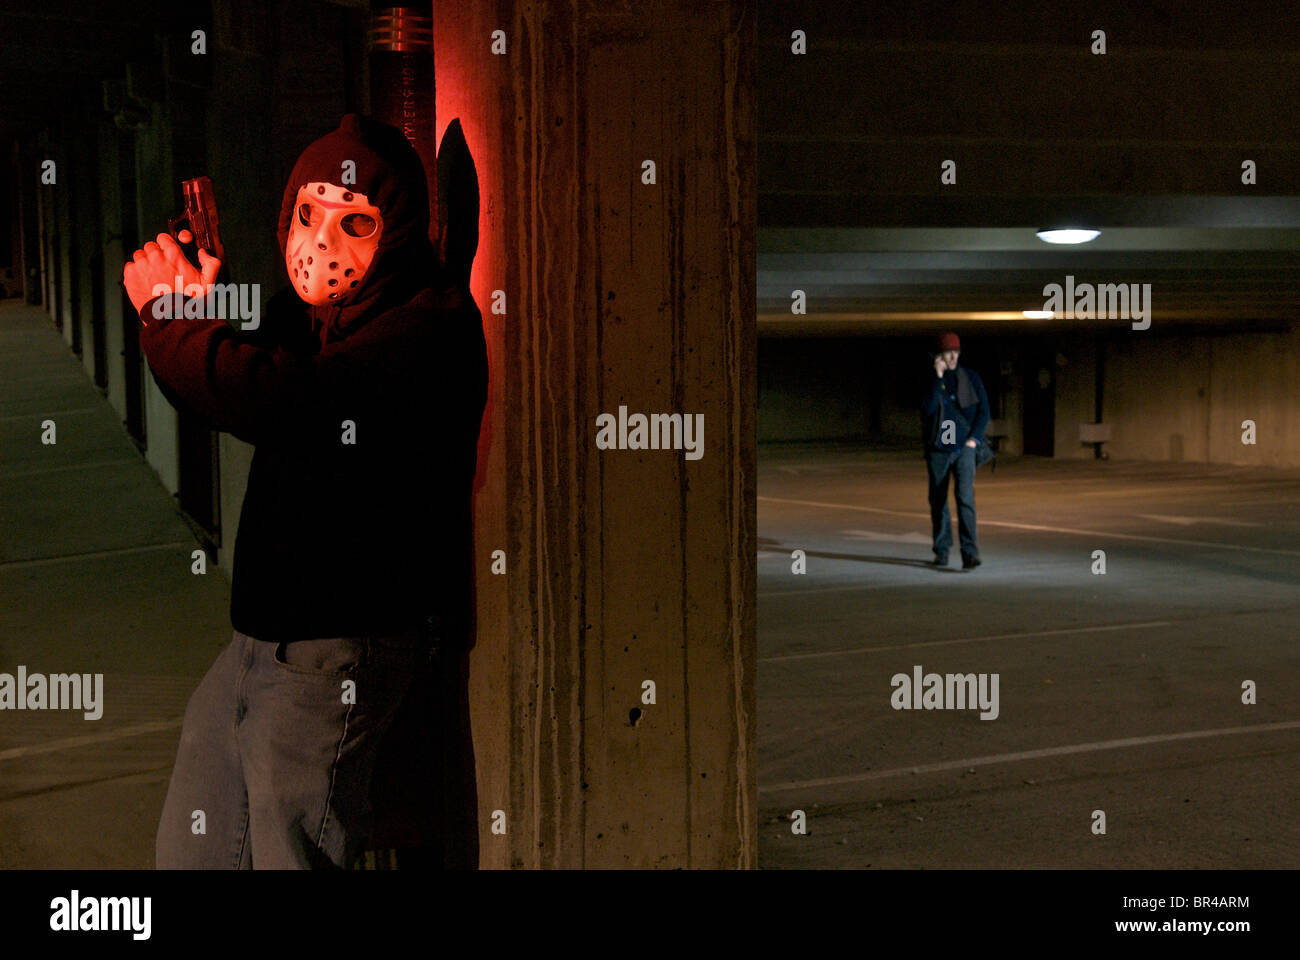 A man being robbed in a parking garage. Stock Photo